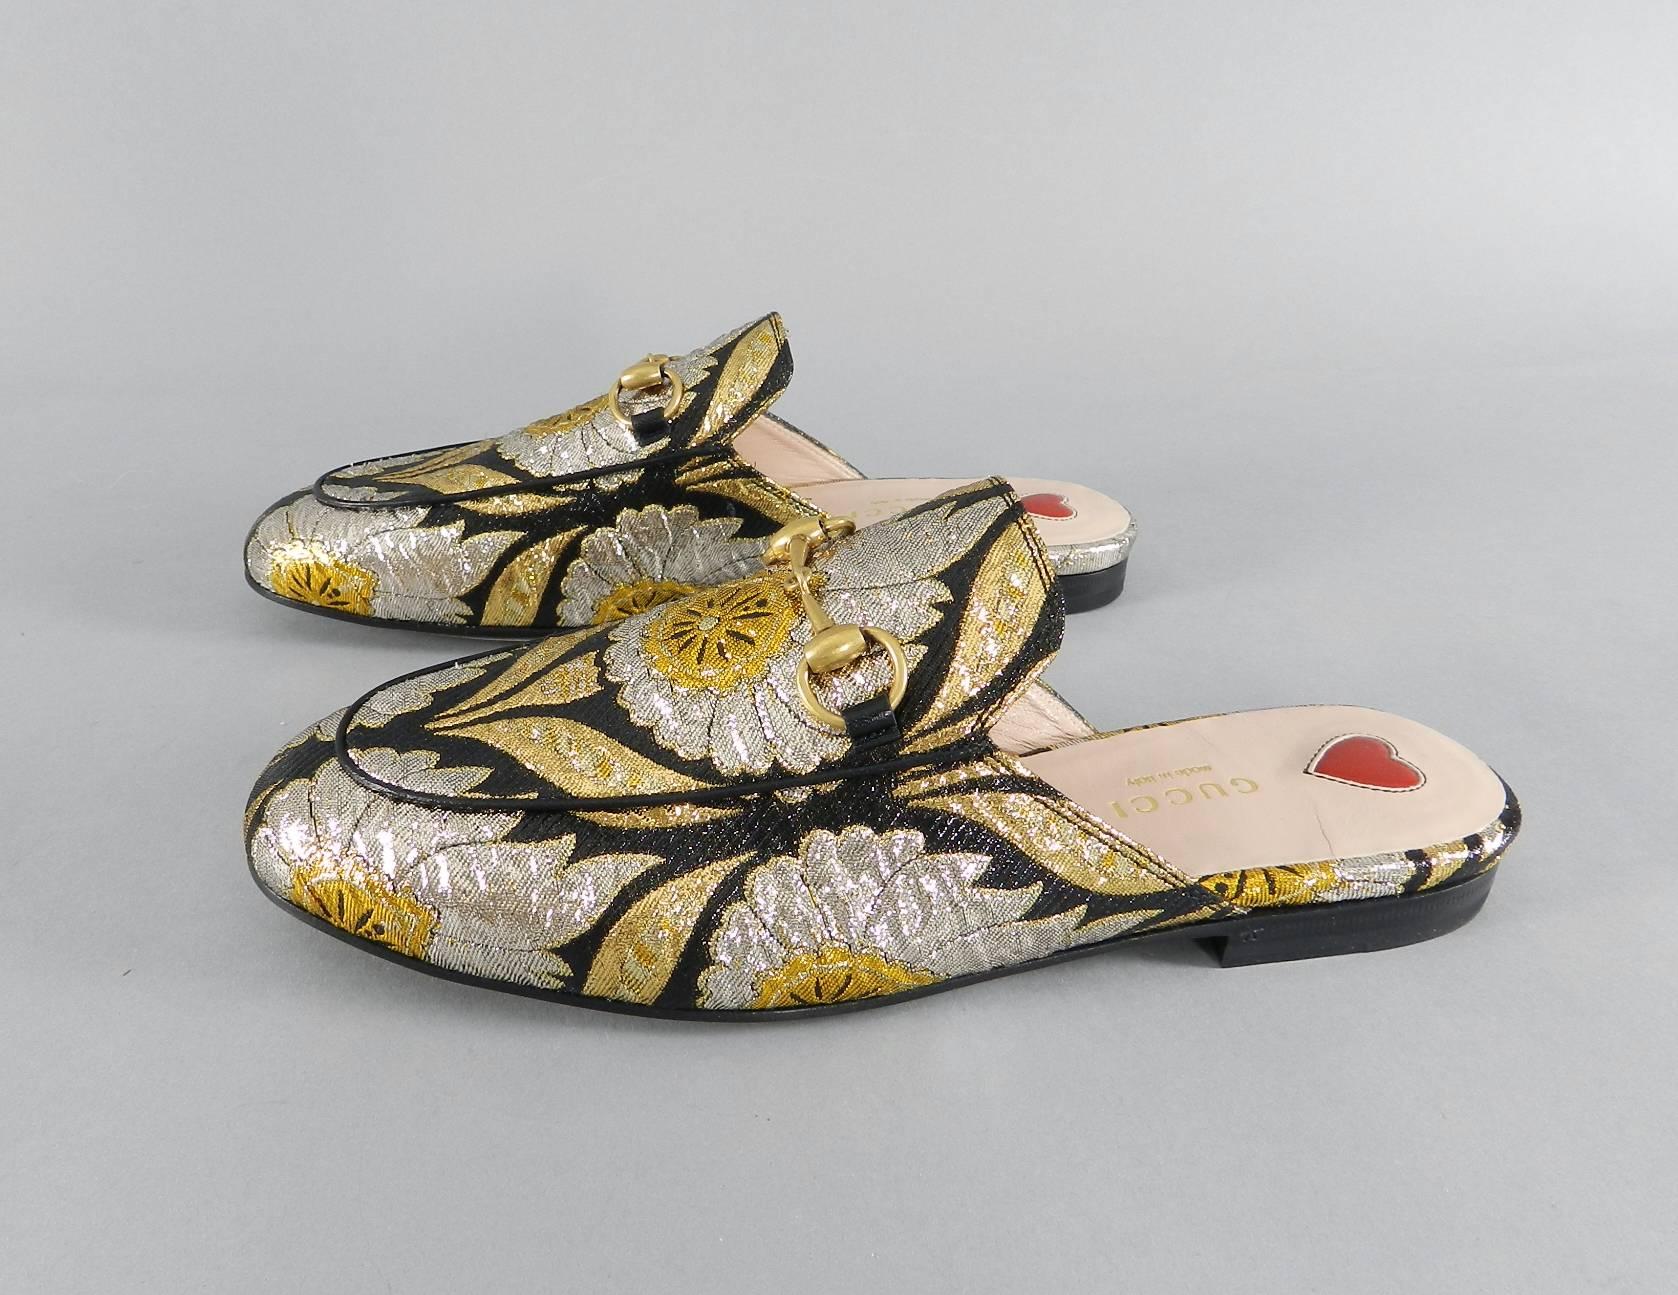 Gucci Princetown Gold Brocade Mules Loafers by Alessandro Michele for Gucci - Size 37 New without Box. 

We ship worldwide.